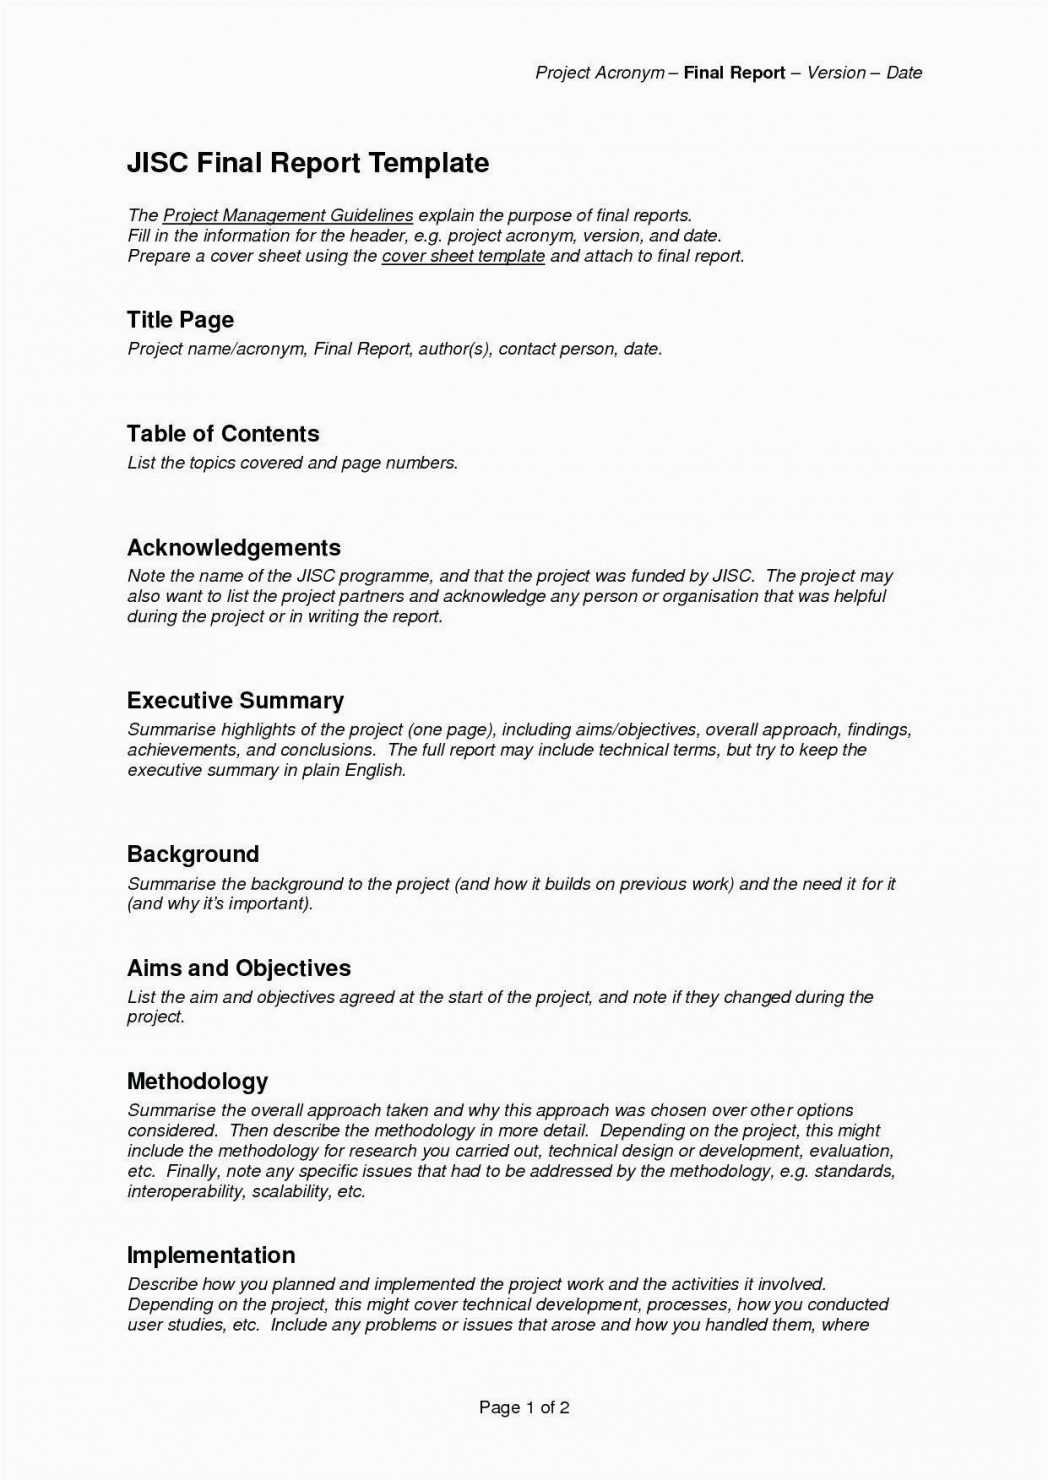 10 Executive Summaries Example | Business Letter Intended For Executive Summary Report Template